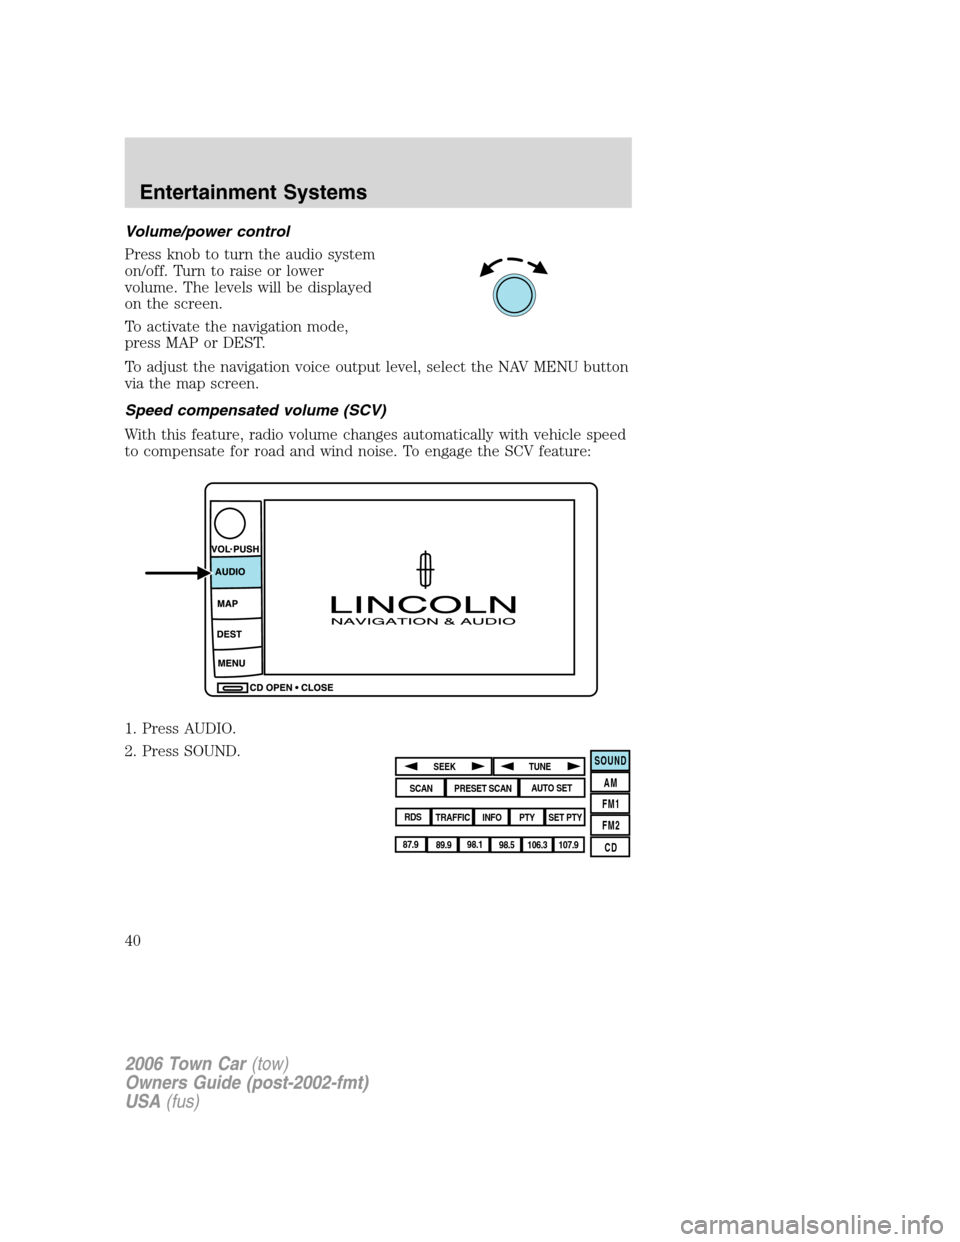 LINCOLN TOWN CAR 2006  Owners Manual Volume/power control
Press knob to turn the audio system
on/off. Turn to raise or lower
volume. The levels will be displayed
on the screen.
To activate the navigation mode,
press MAP or DEST.
To adjus